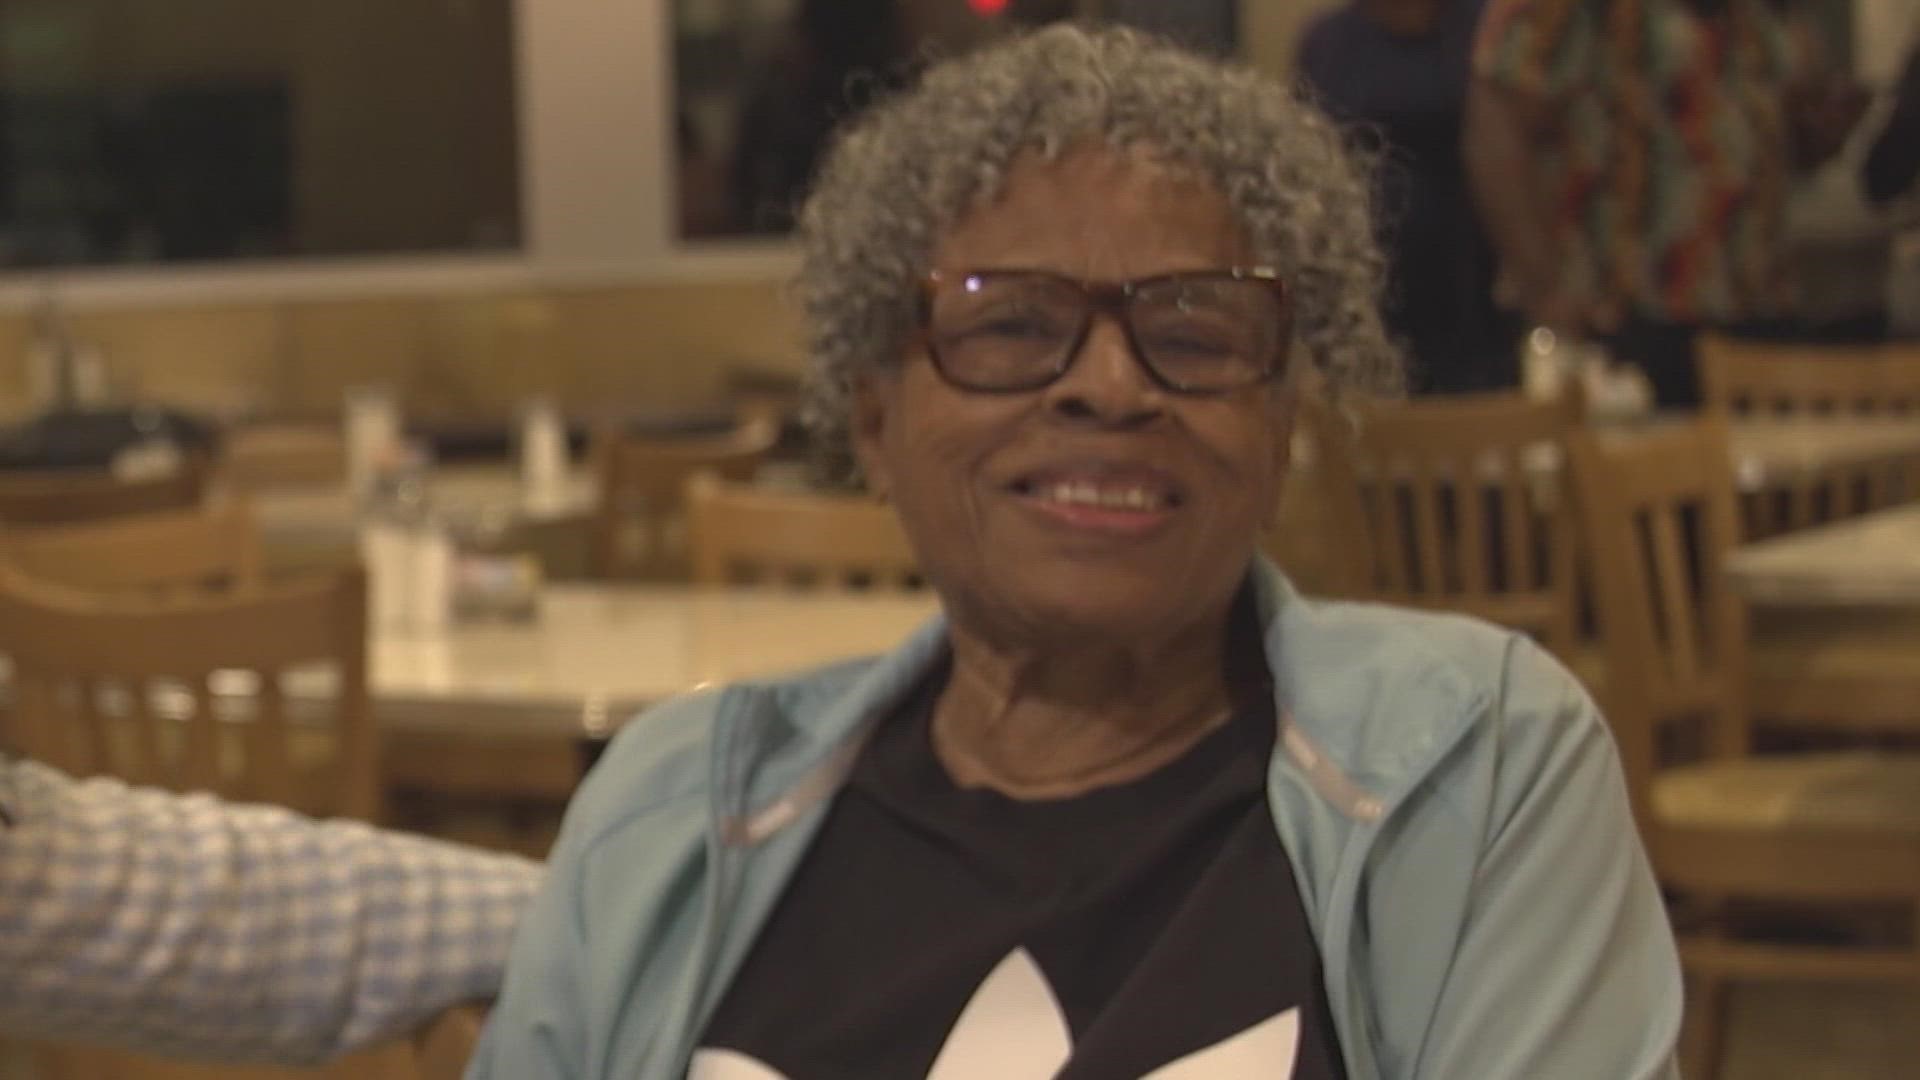 For decades, she has been a leader for civil rights, a fundraiser for local nonprofits and an advocate for raising national awareness for Juneteenth.